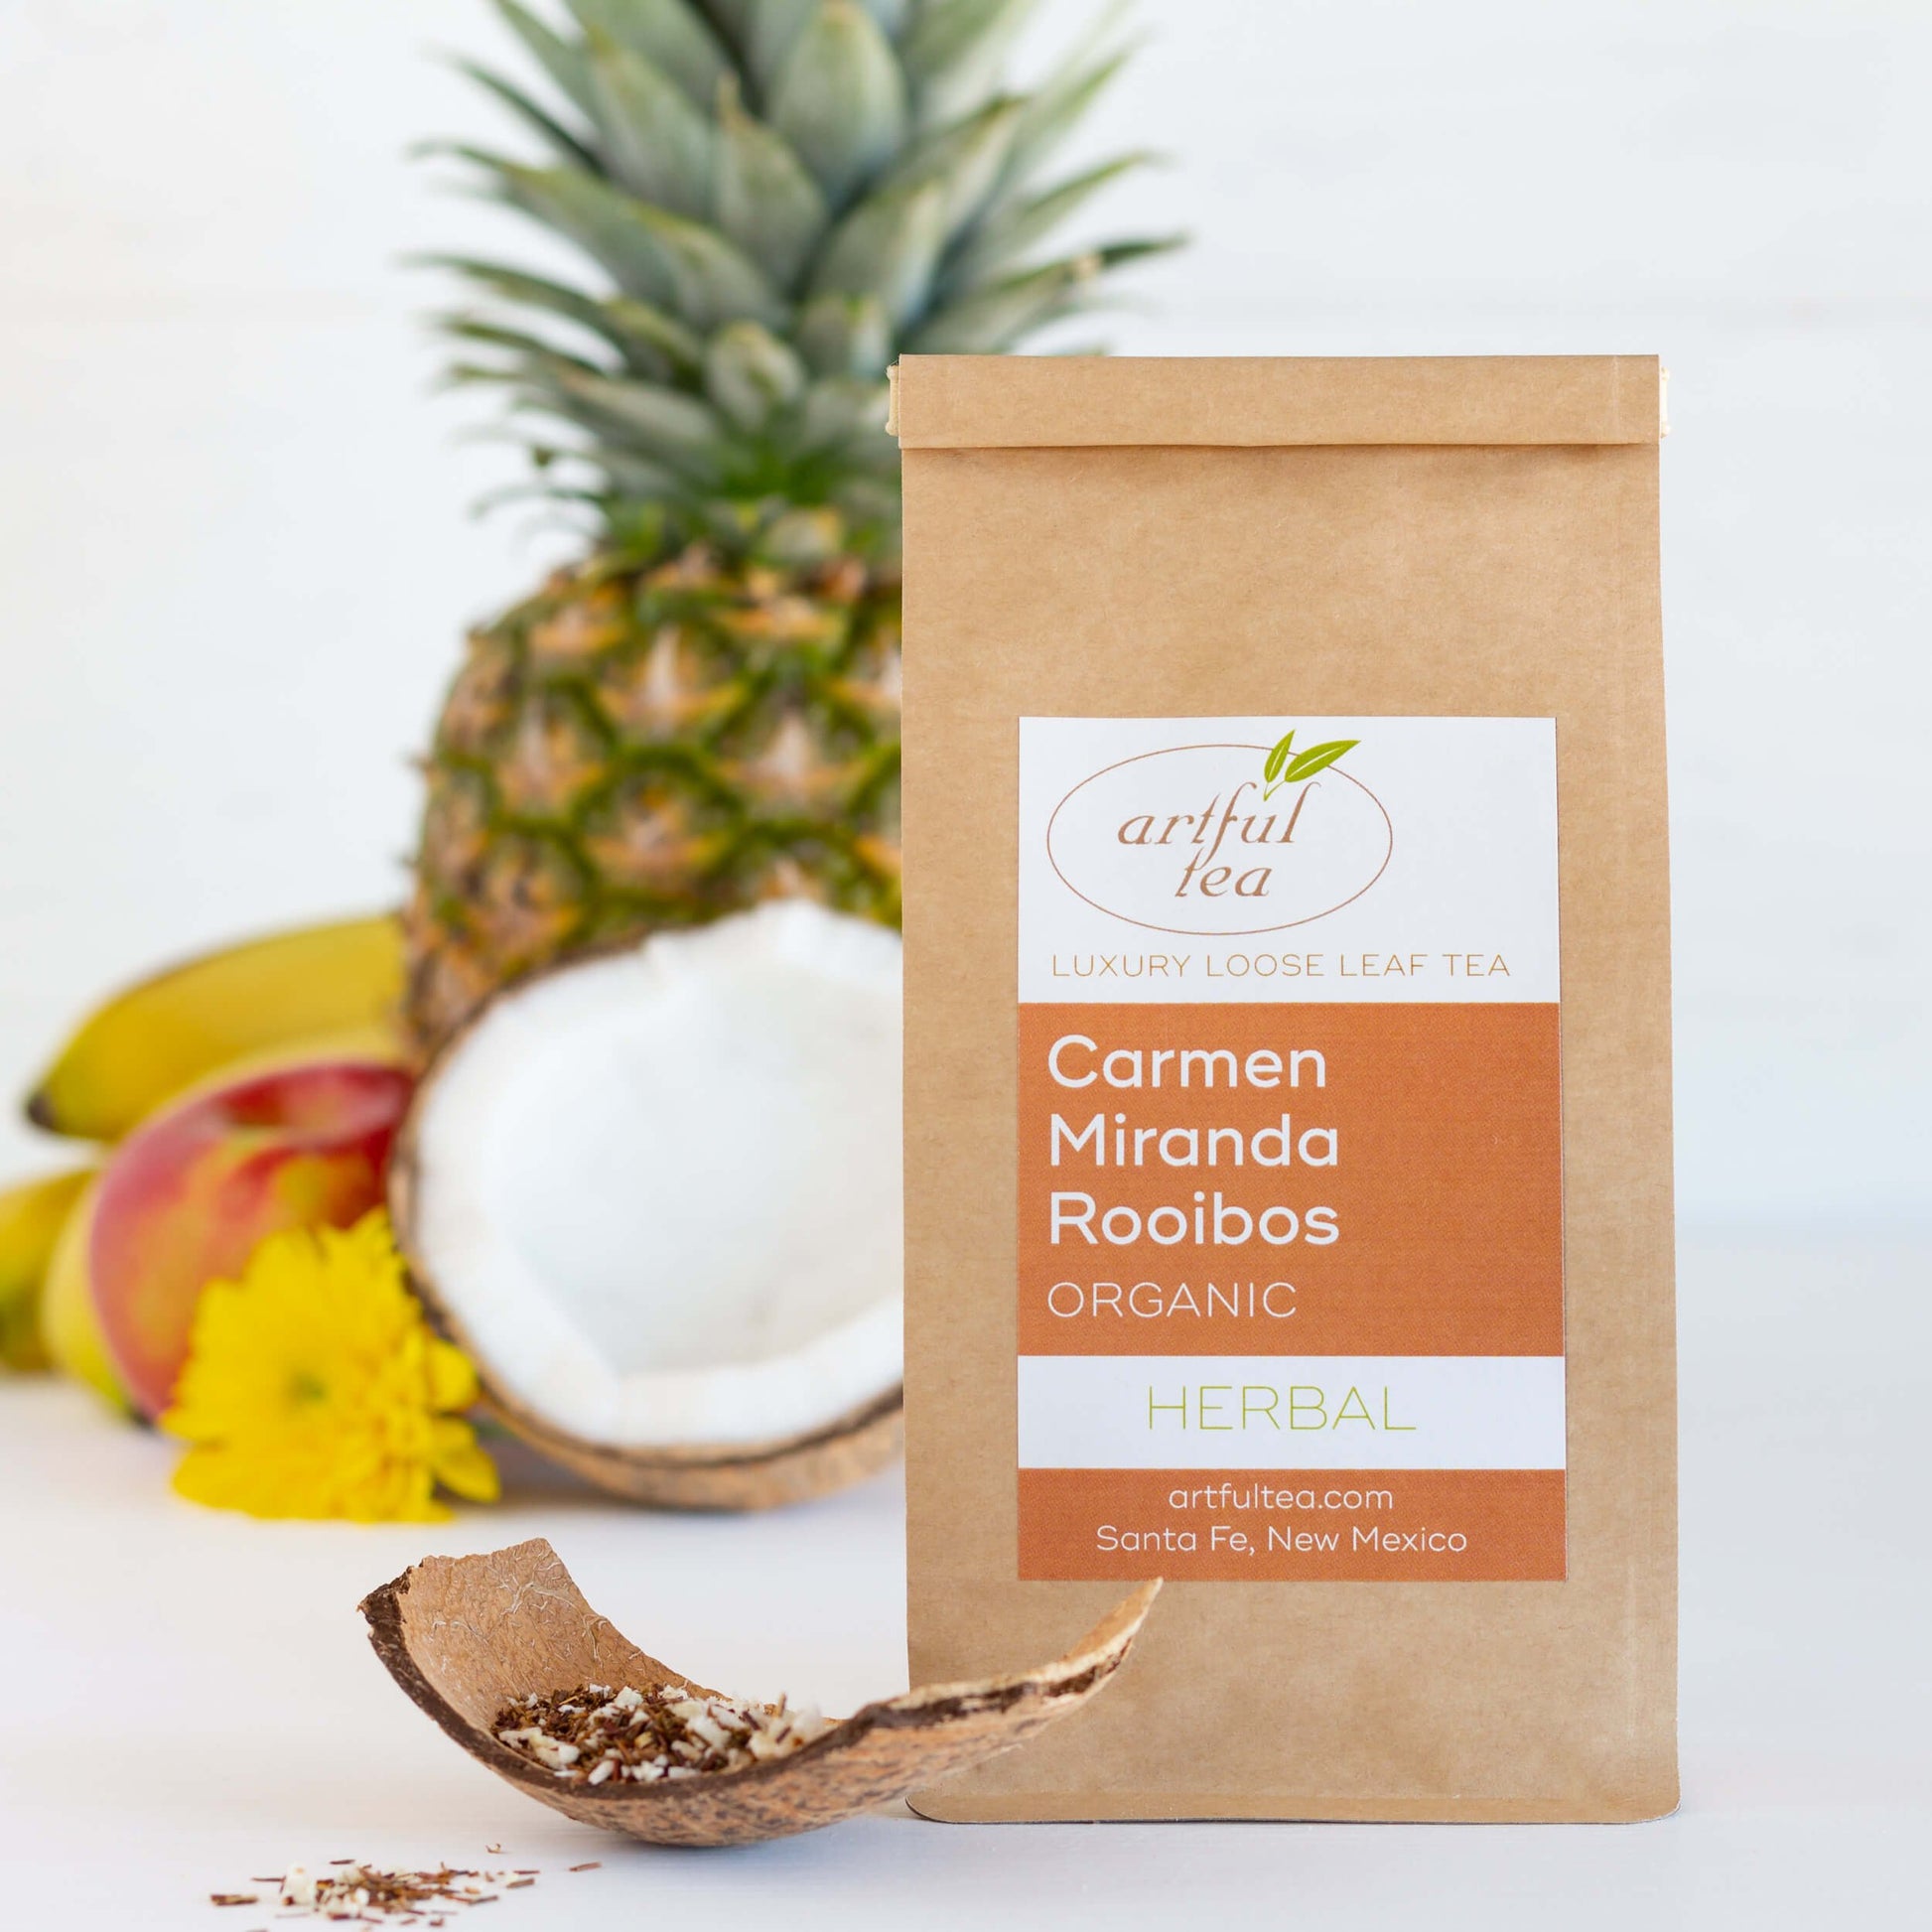 Carmen Miranda Rooibos Organic Herbal Tea shown packaged in a kraft bag, with a piece of coconut shell and loose tea in the foreground, and a coconut half, a pineapple, an apple, and bananas in the background